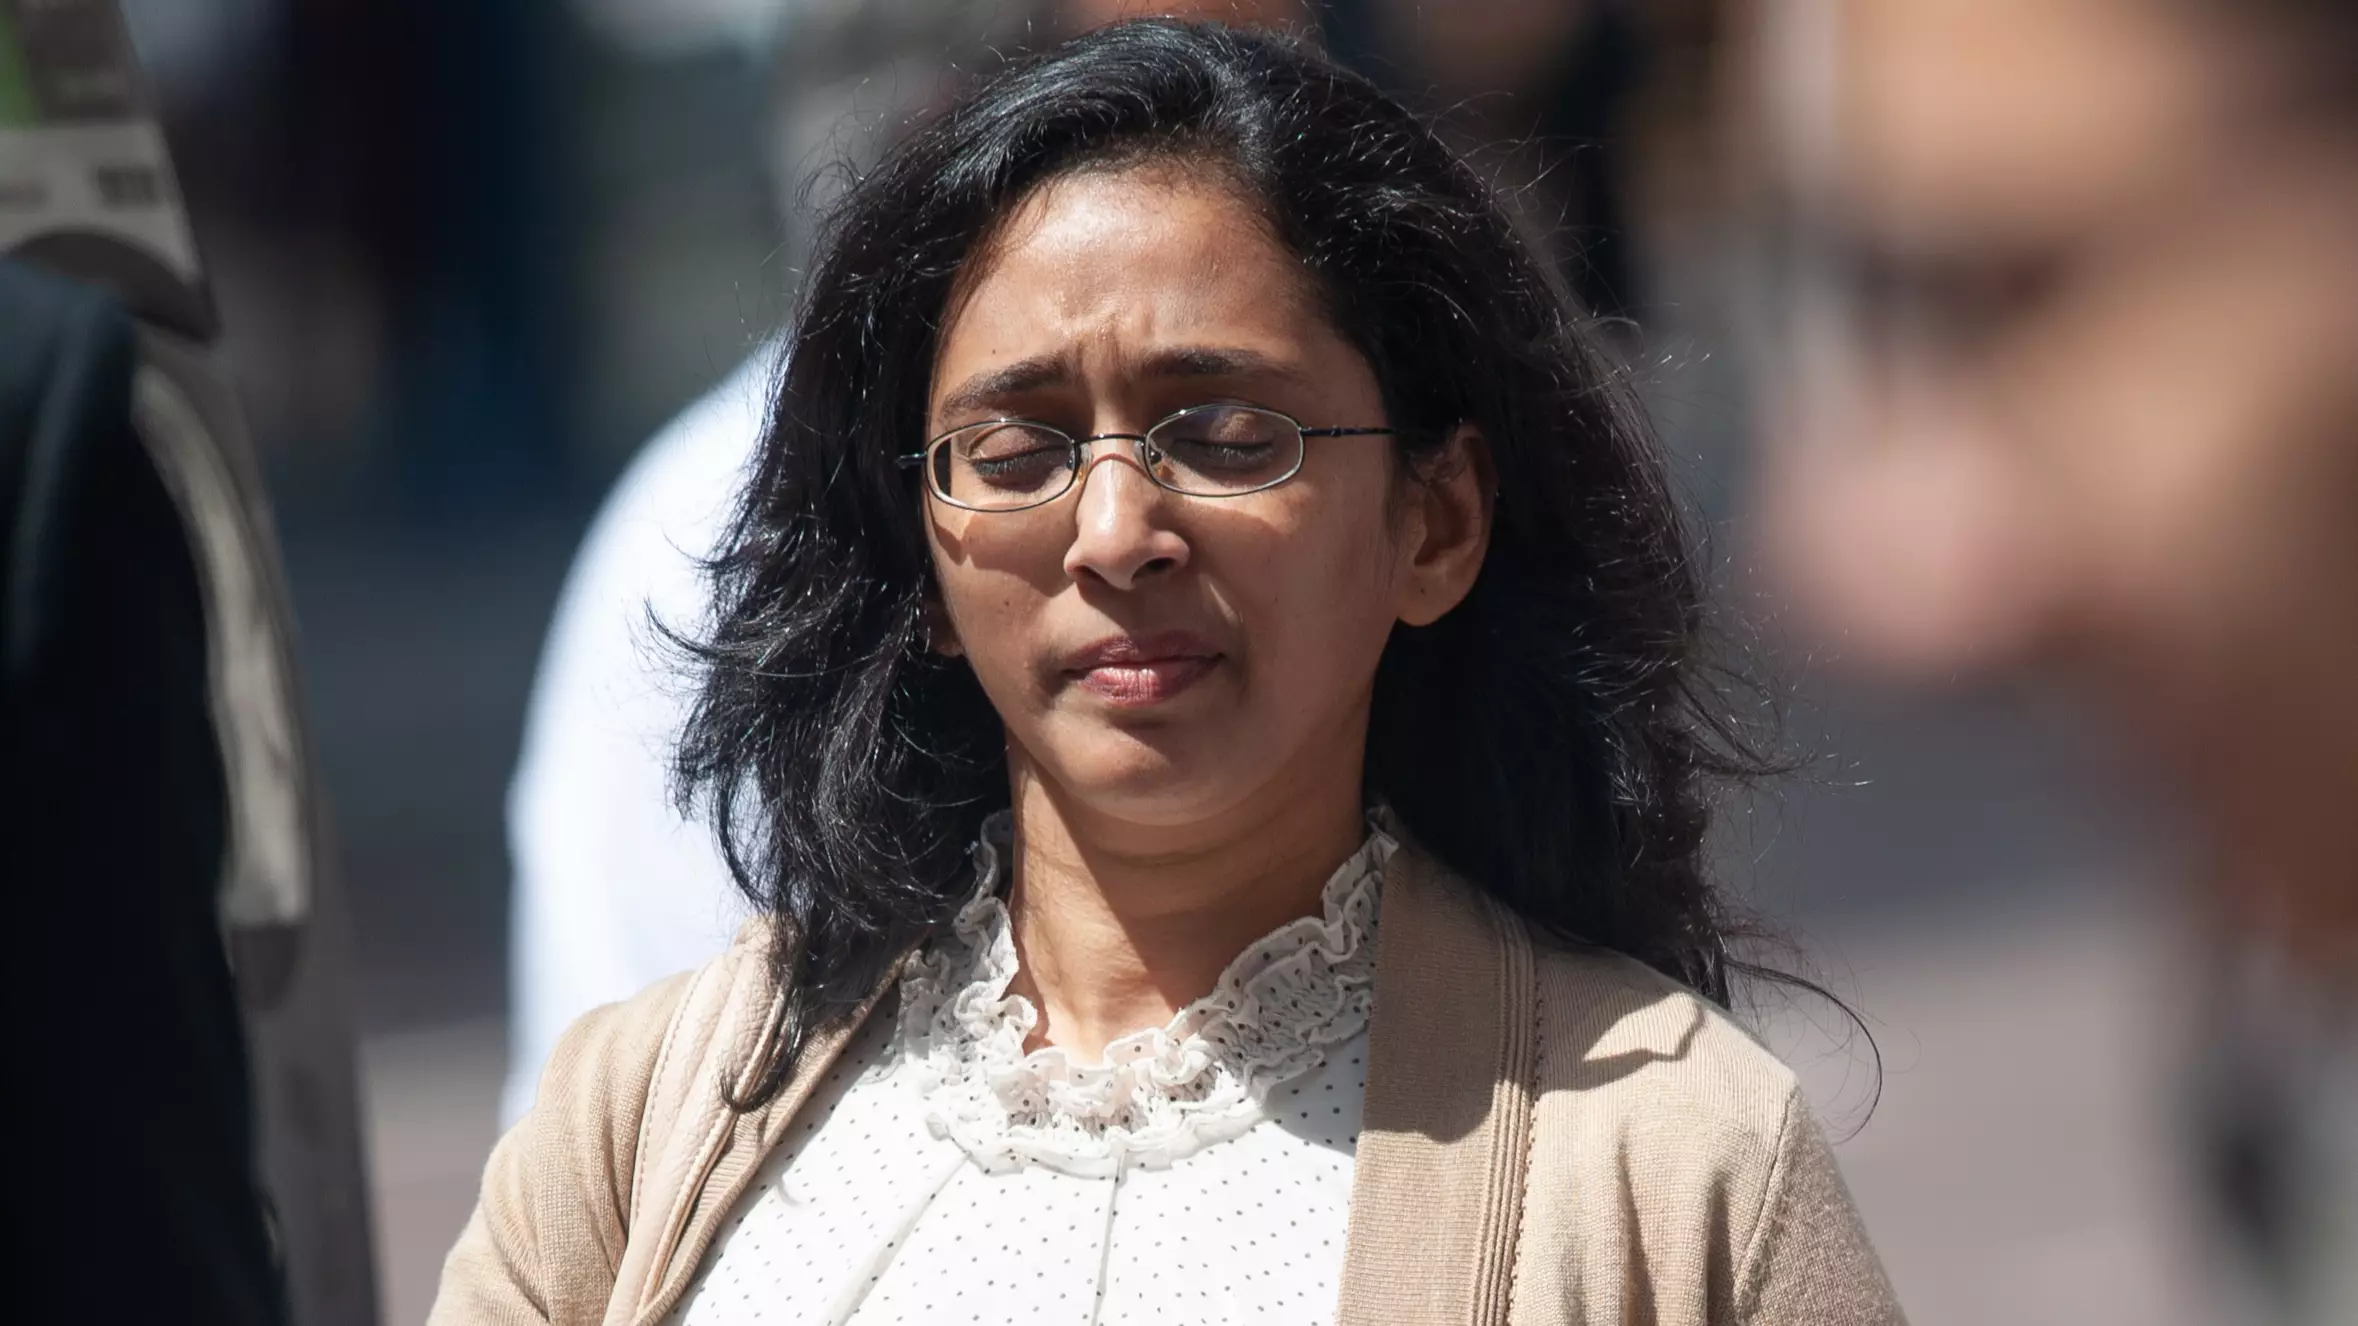 Gynaecologist Who Caused Unborn Baby To Be Decapitated Keeps Her NHS Job